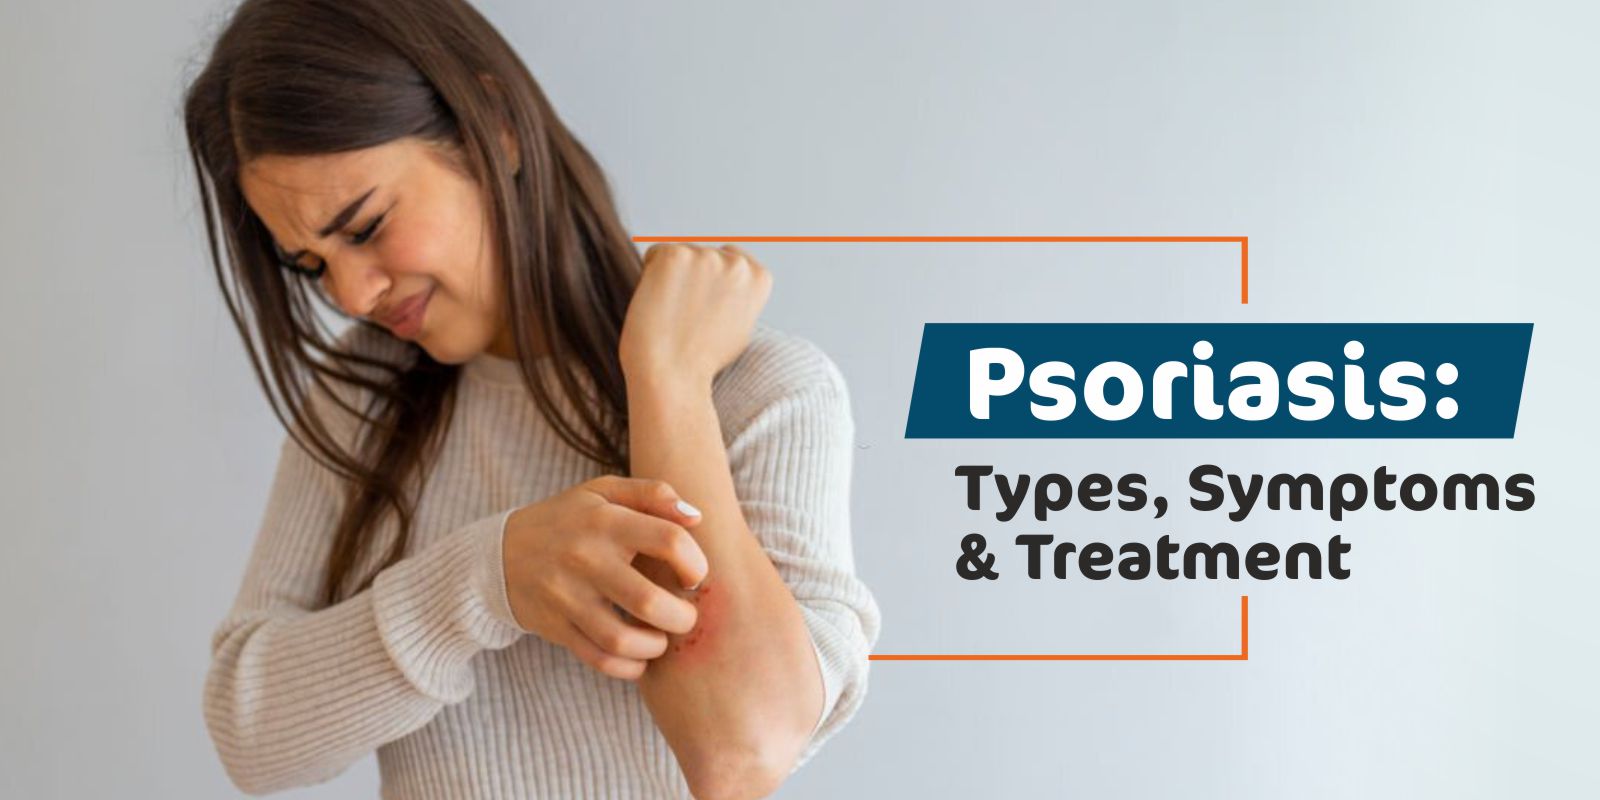 Psoriasis: Types, Symptoms and Treatment